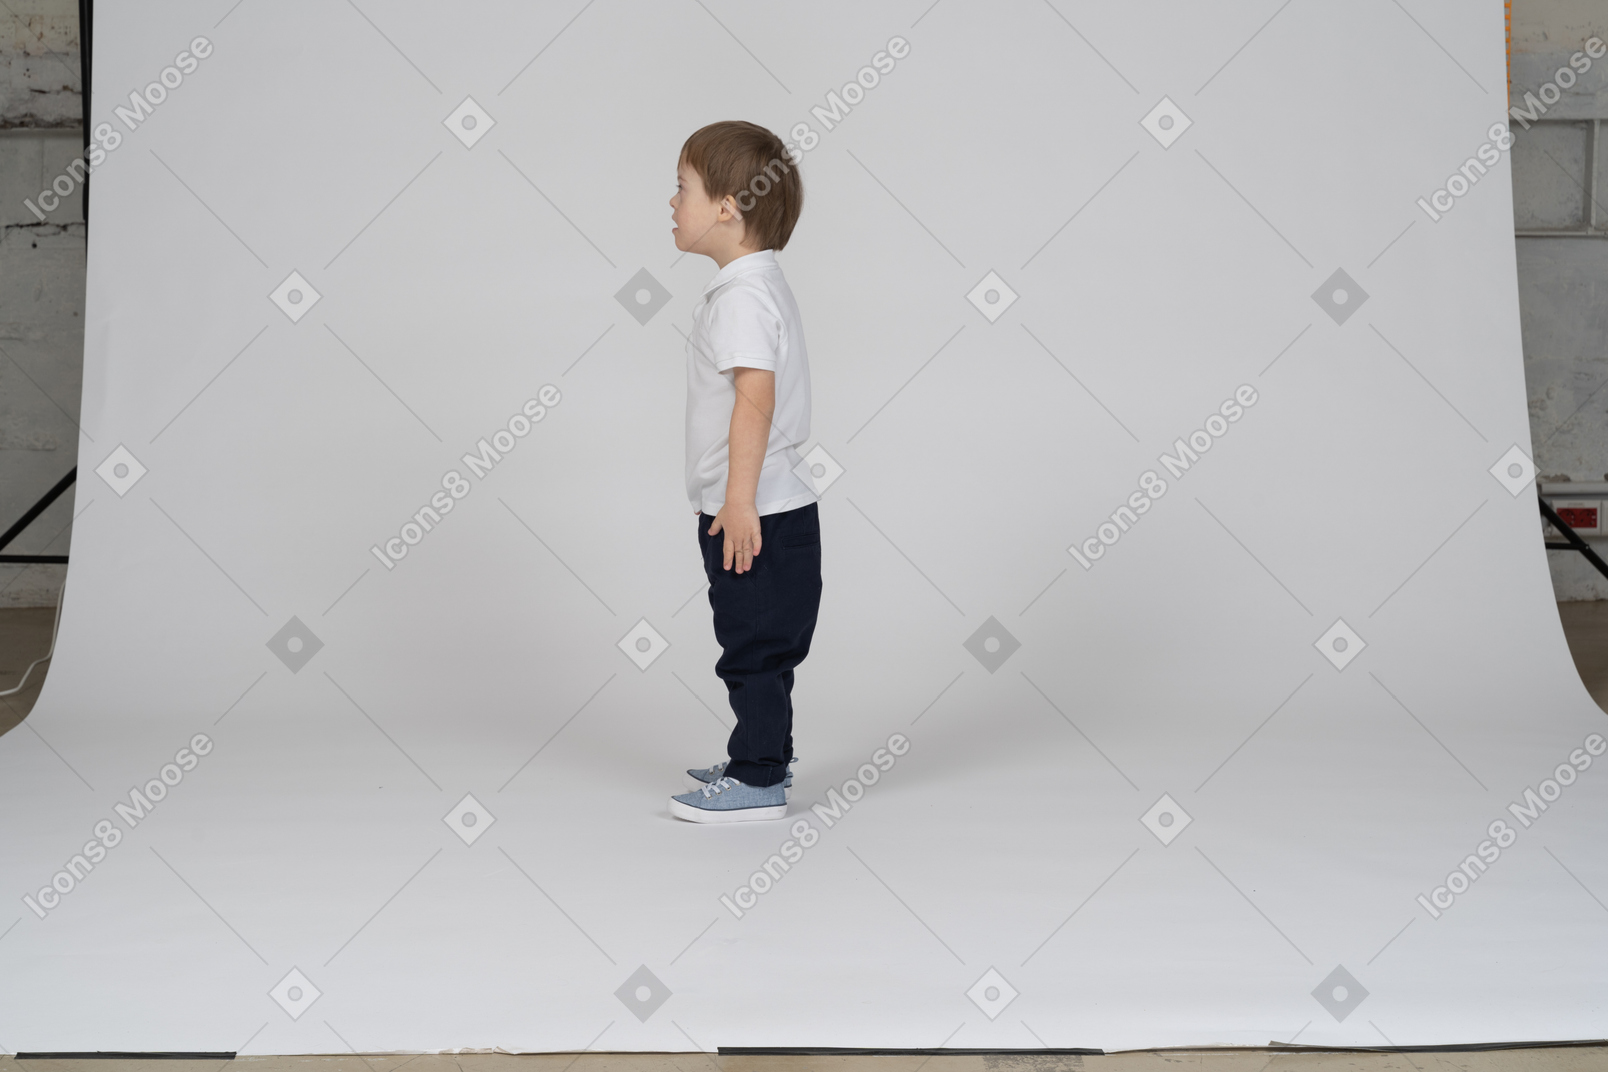 Little boy standing upright with arms at side